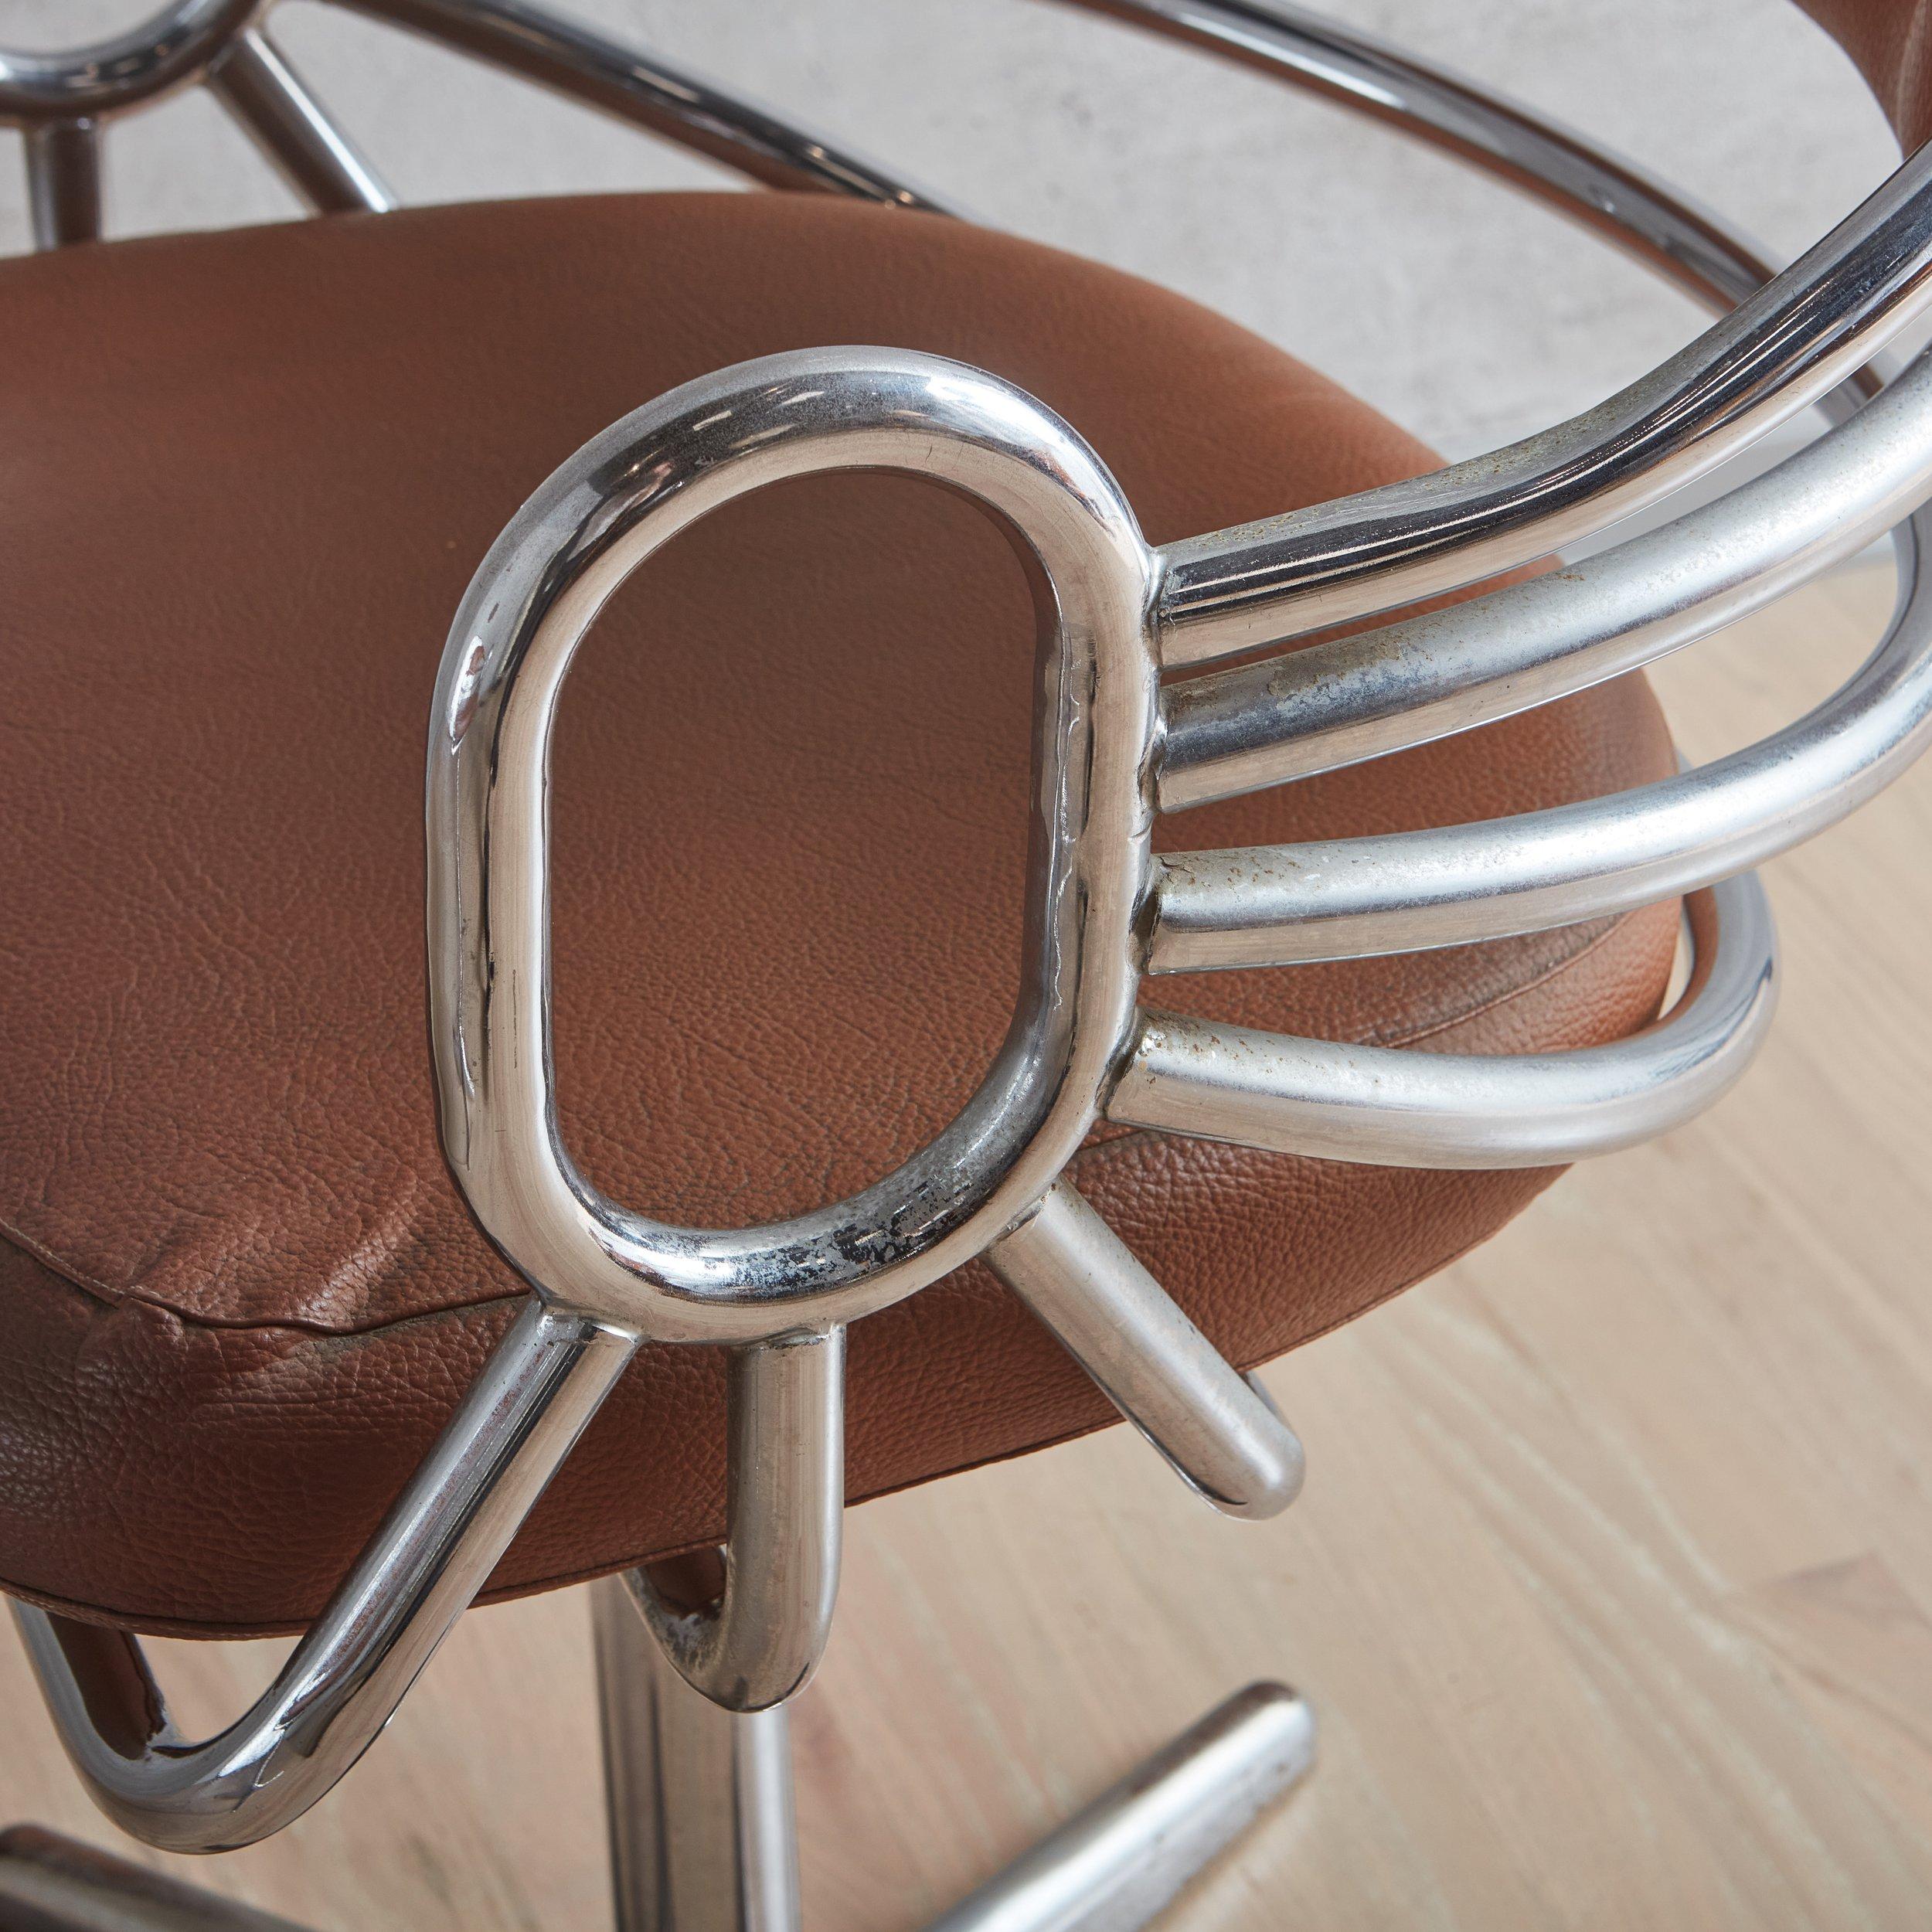 Chrome Swivel Desk Chair in Brown Leather, Italy 1960s - 2 Available For Sale 2